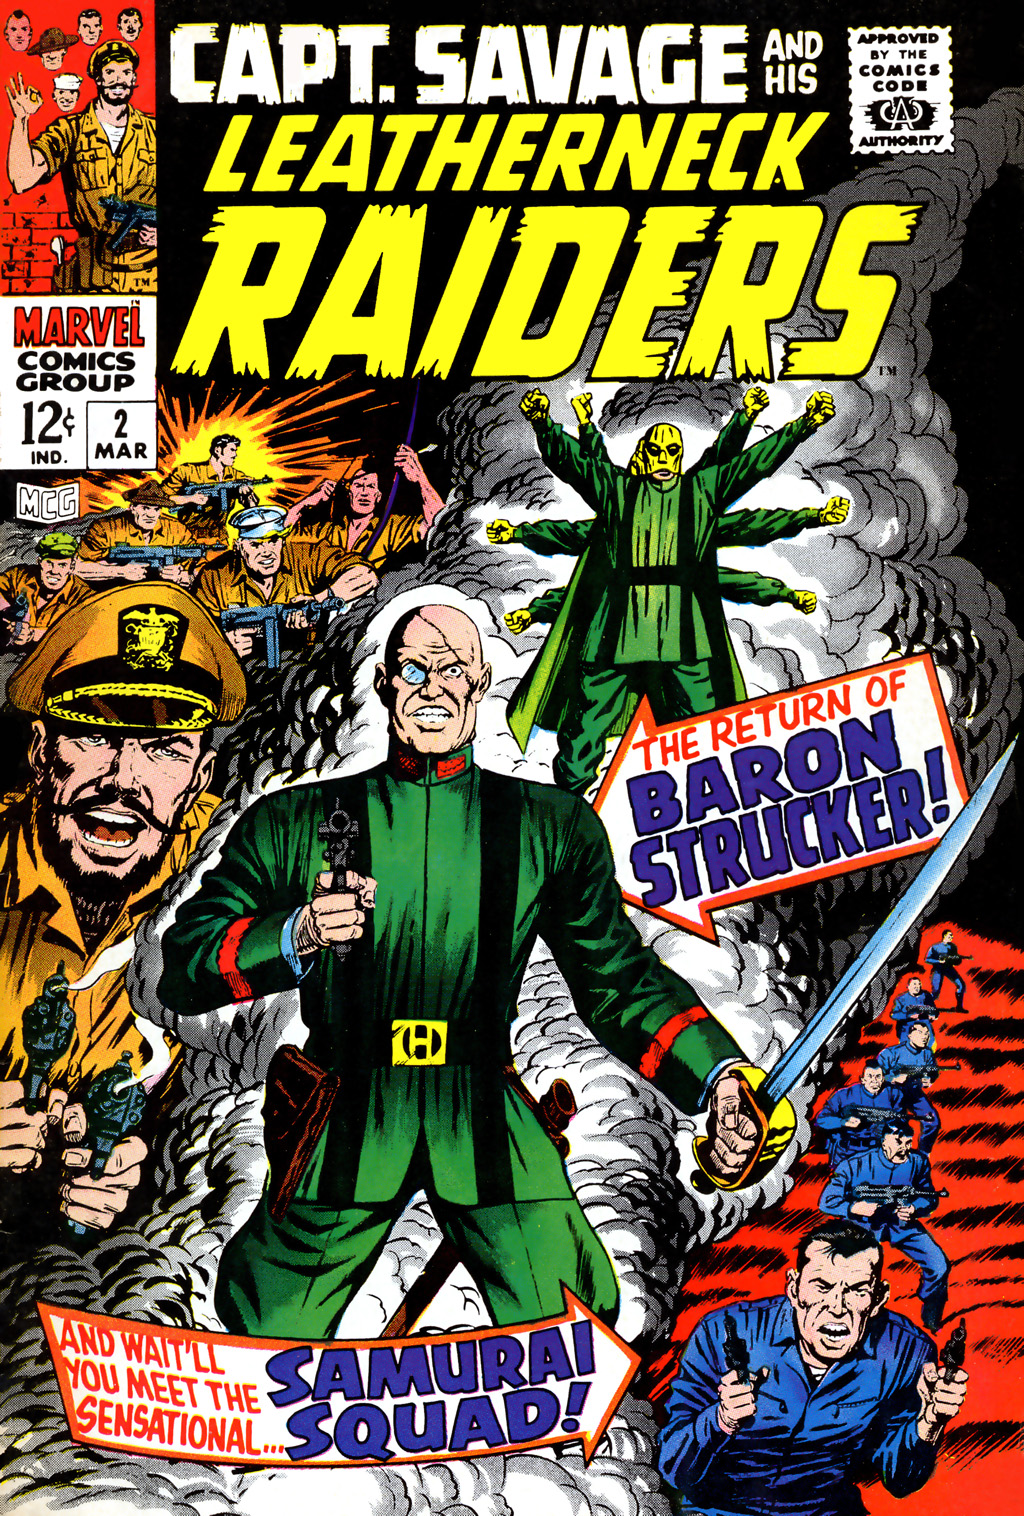 Read online Captain Savage and his Leatherneck Raiders comic -  Issue #2 - 1